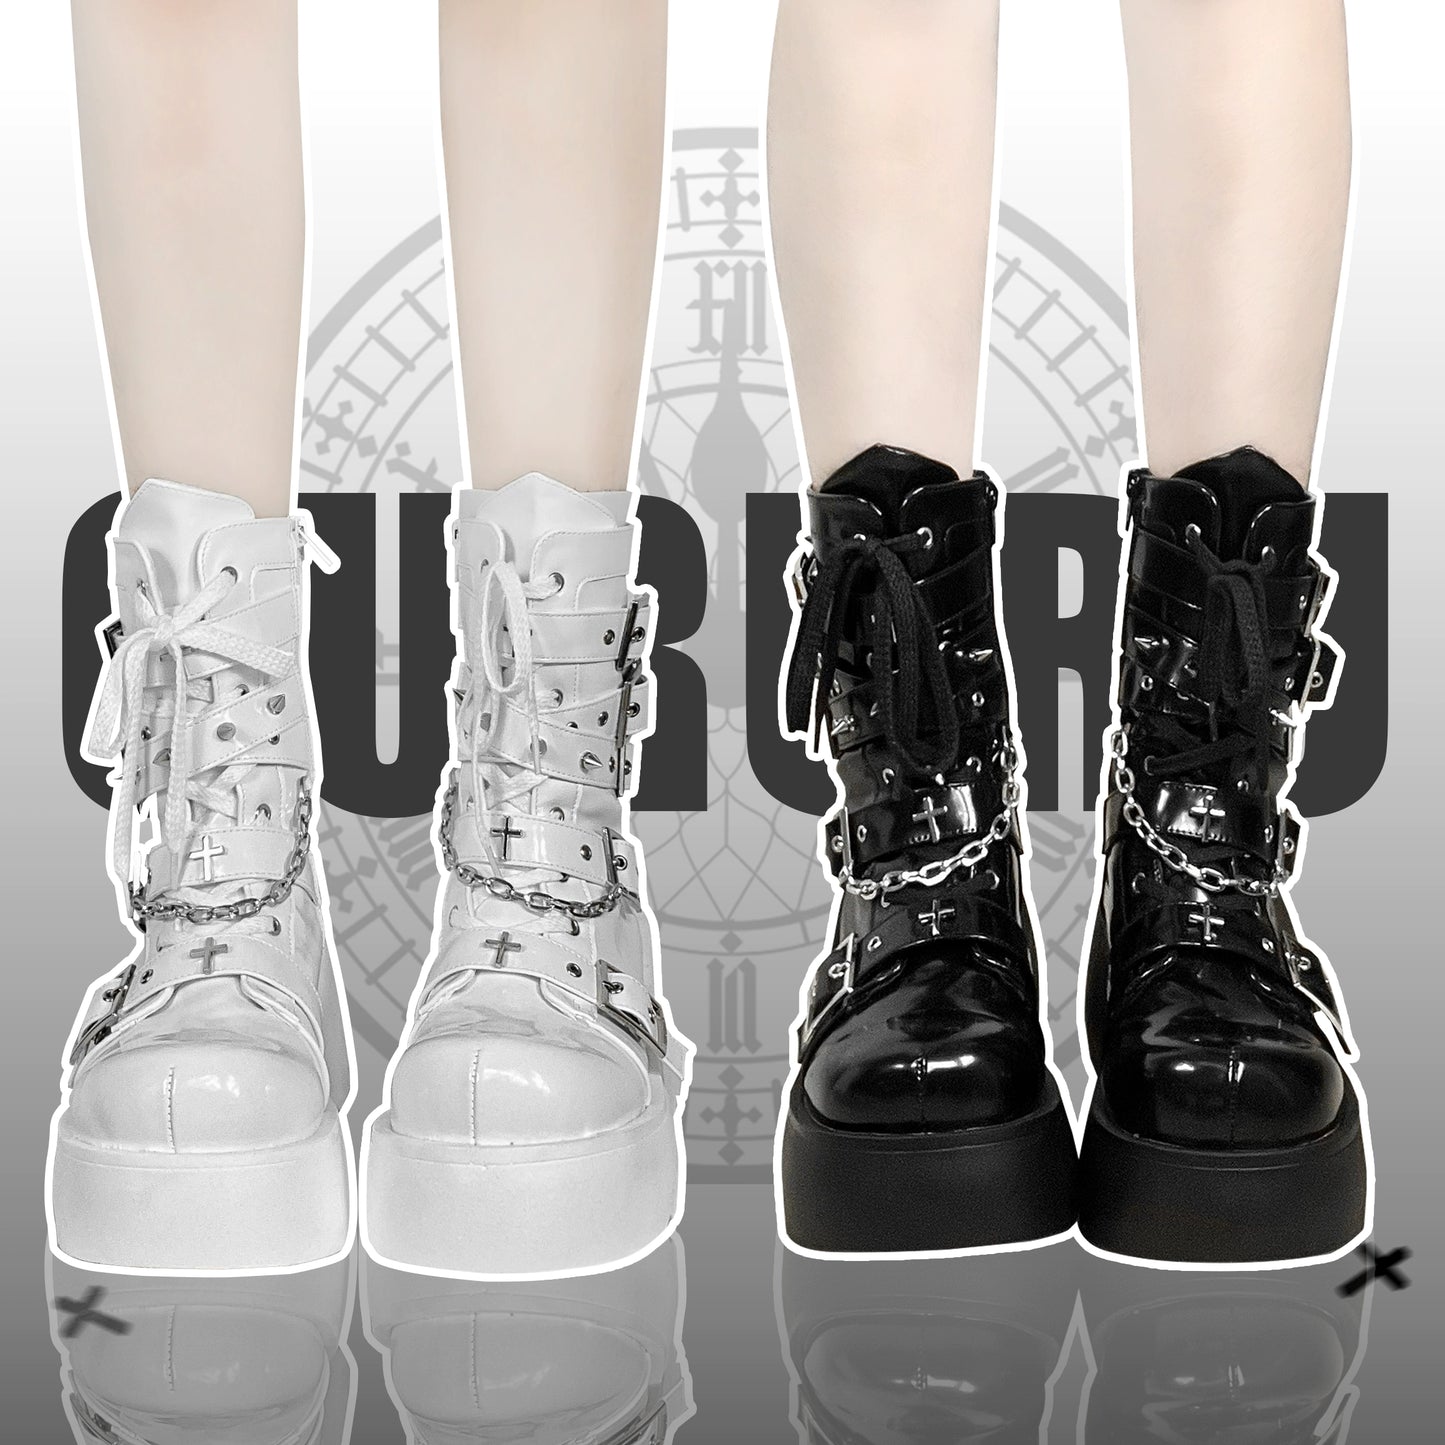 Y2K Spicy Girl Cross Black White Platform Shoes Boots 28962:343914